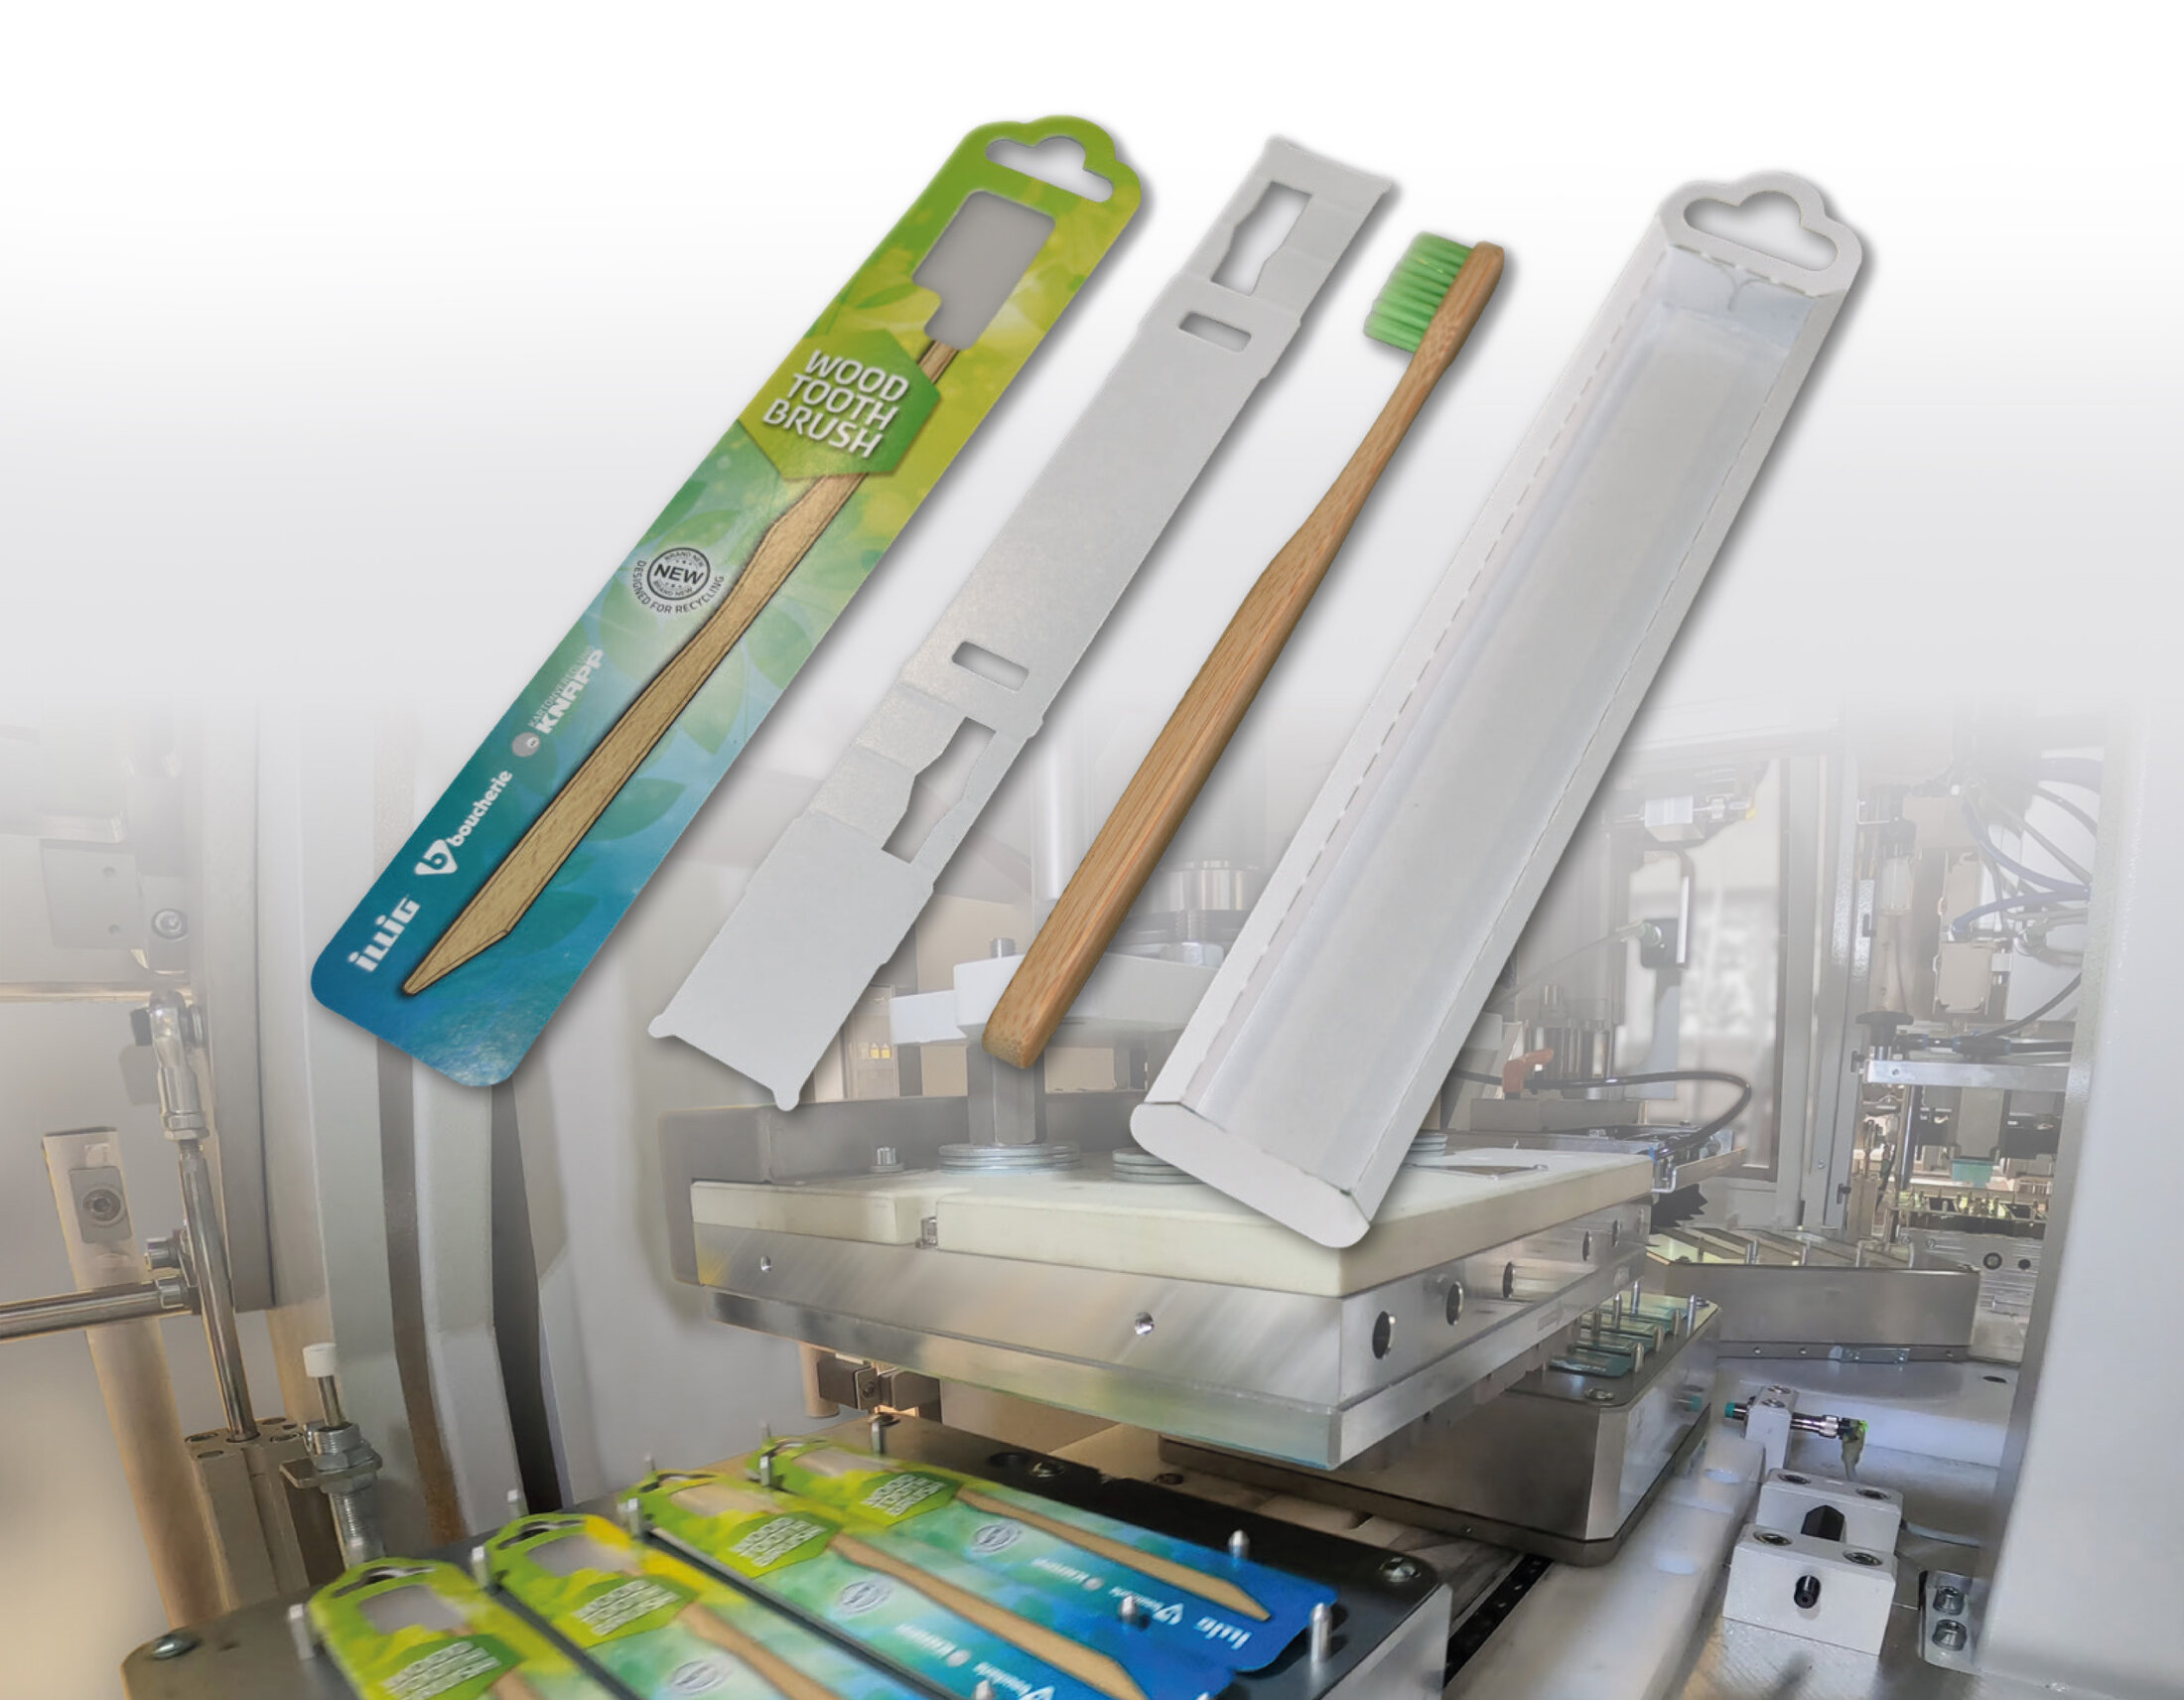 ILLIG's HSU 35b flexible packaging system is suitable for sustainable blister packaging made of solid cardboard with inlay for product fixation. | © ILLIG Maschinenbau Gmbh & Co. KG